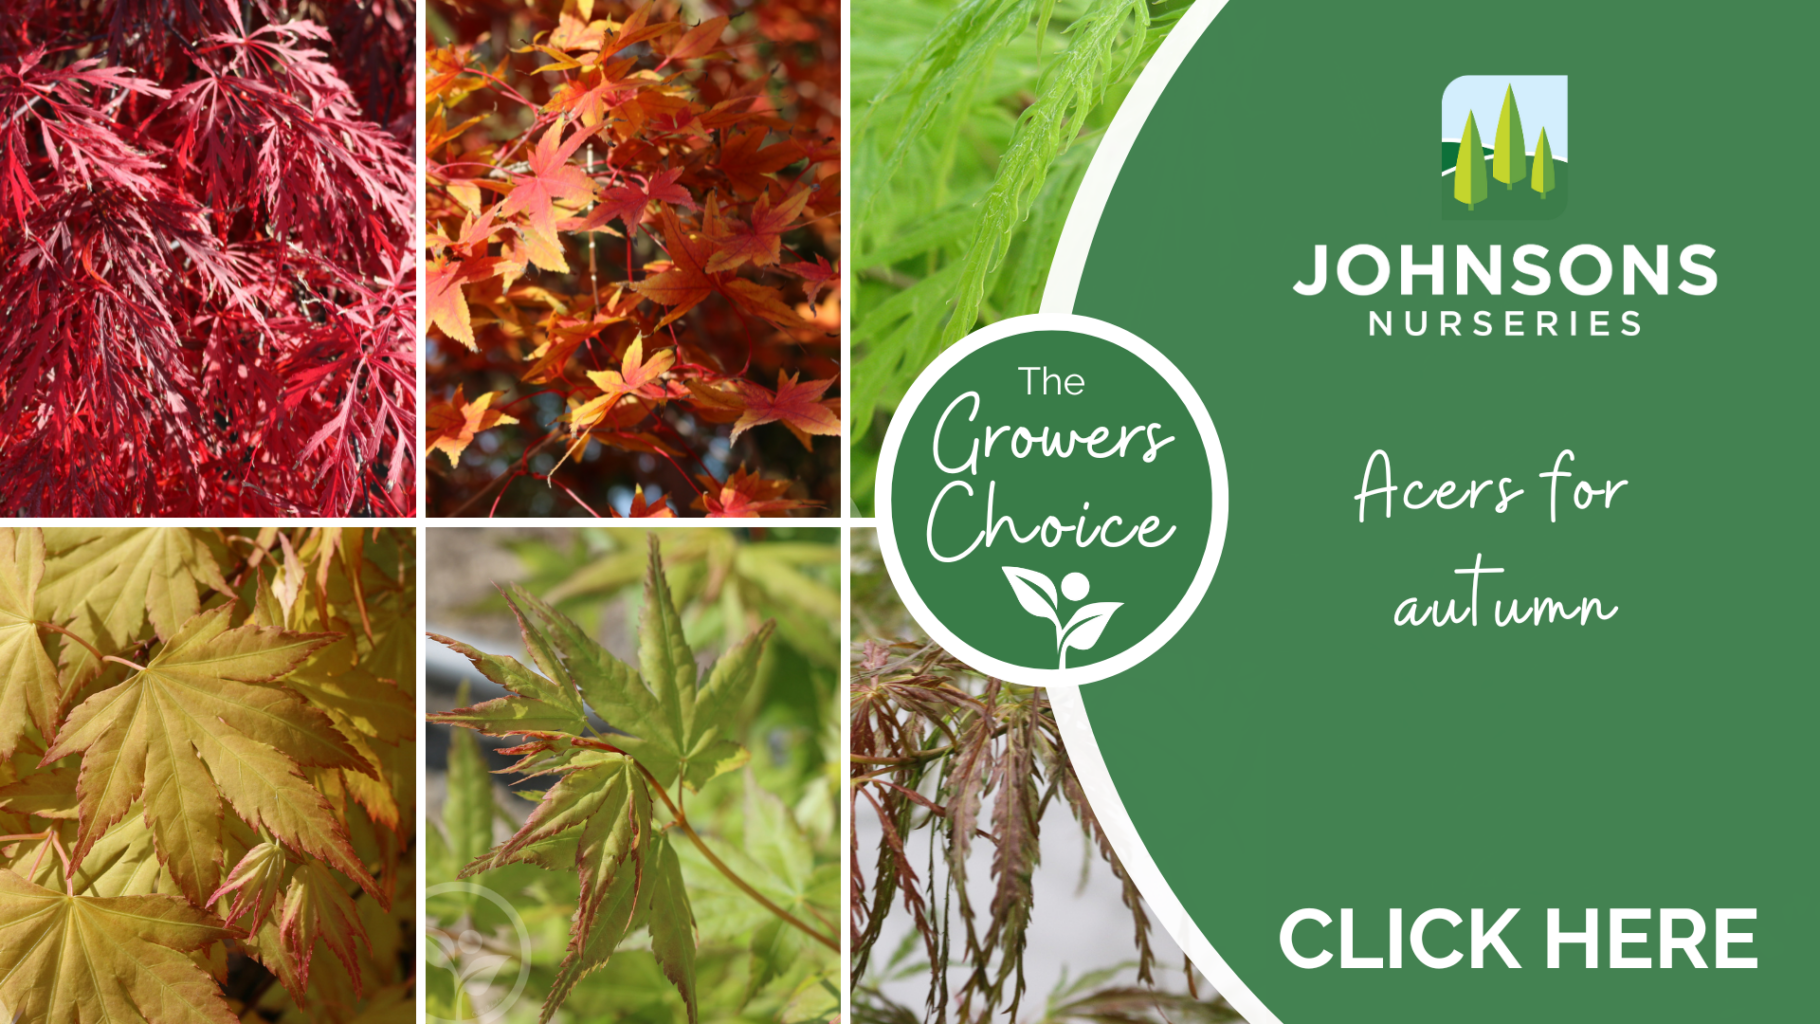 The Growers Choice - Acers for autumn